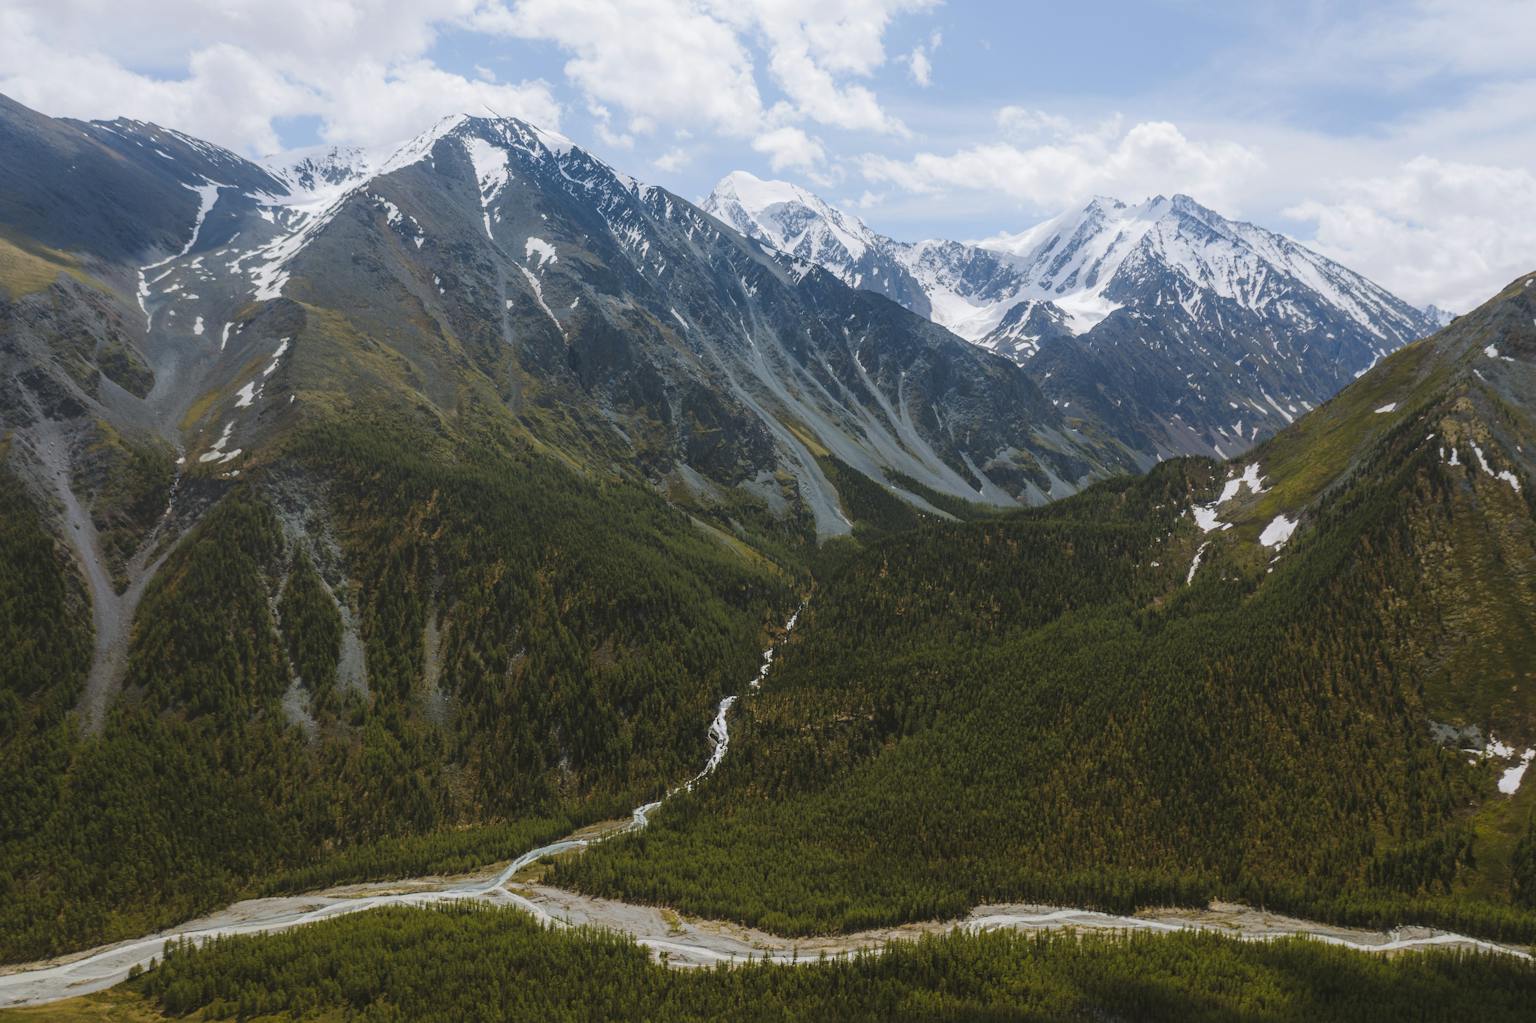 Altai Mountains under Cloudy Blue Sky